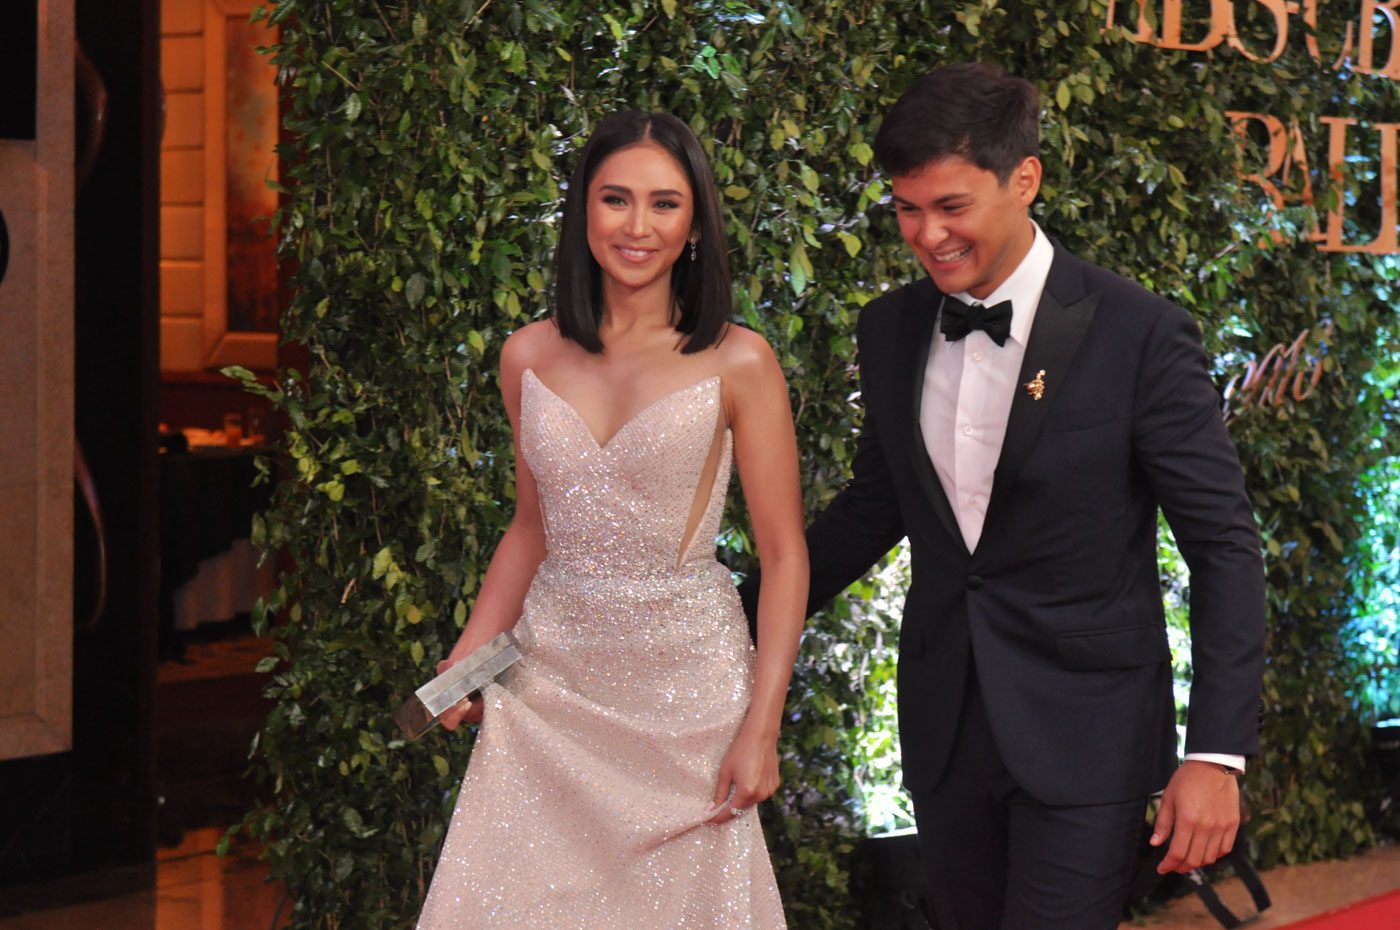 Sarah Geronimo and Matteo Guidicelli are married